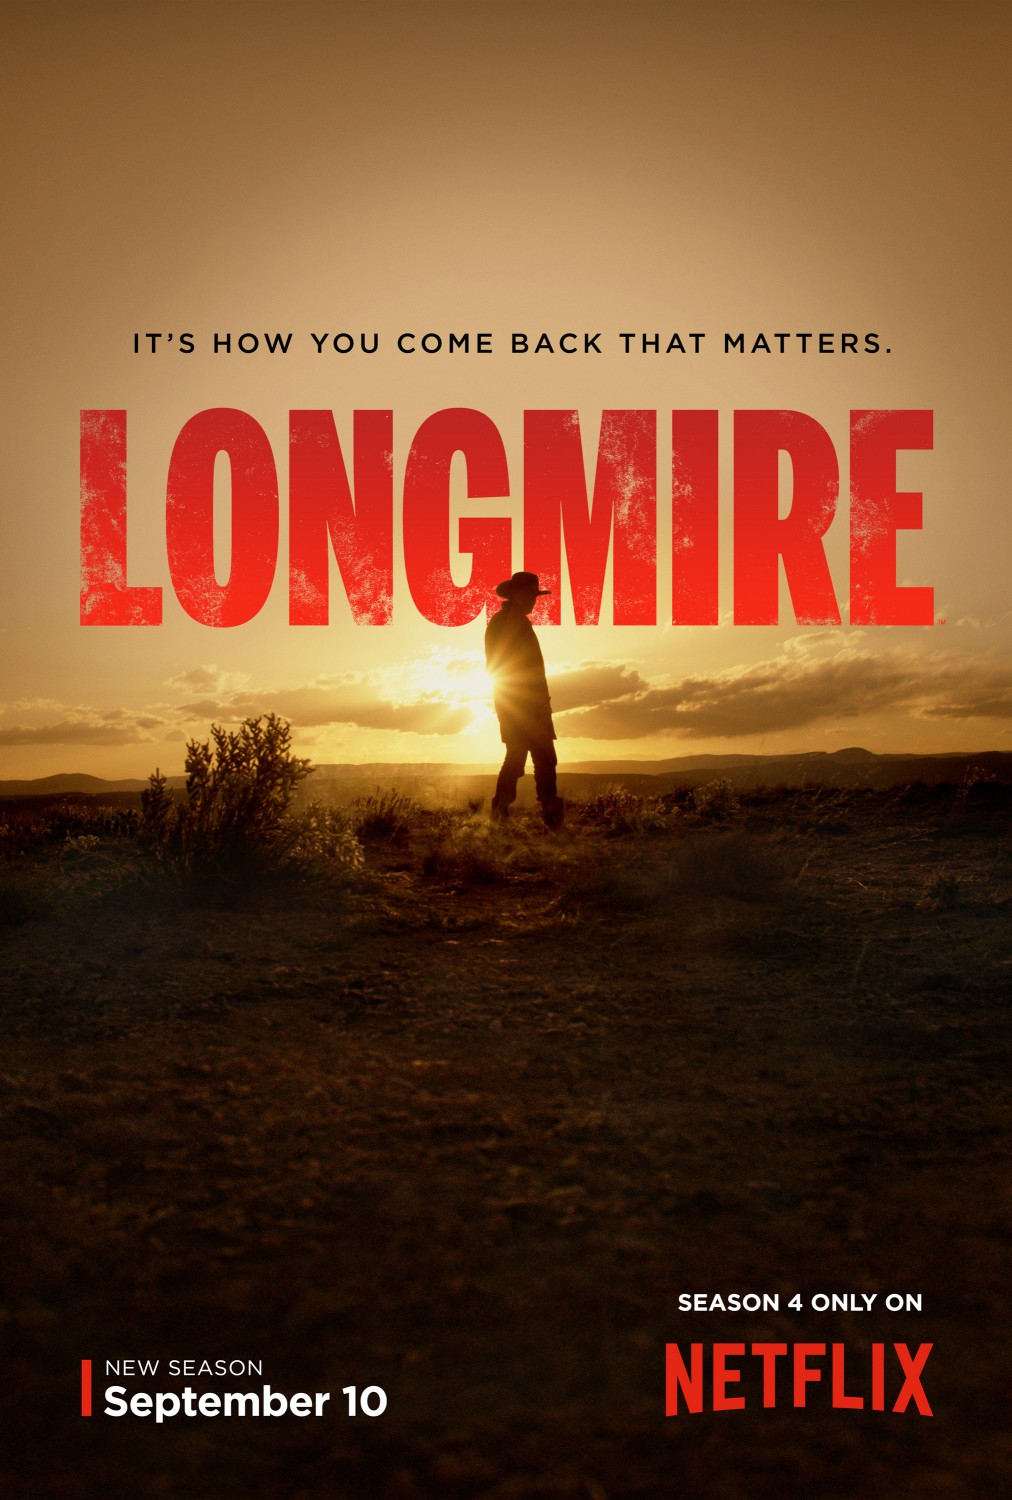 Extra Large TV Poster Image for Longmire (#6 of 8)